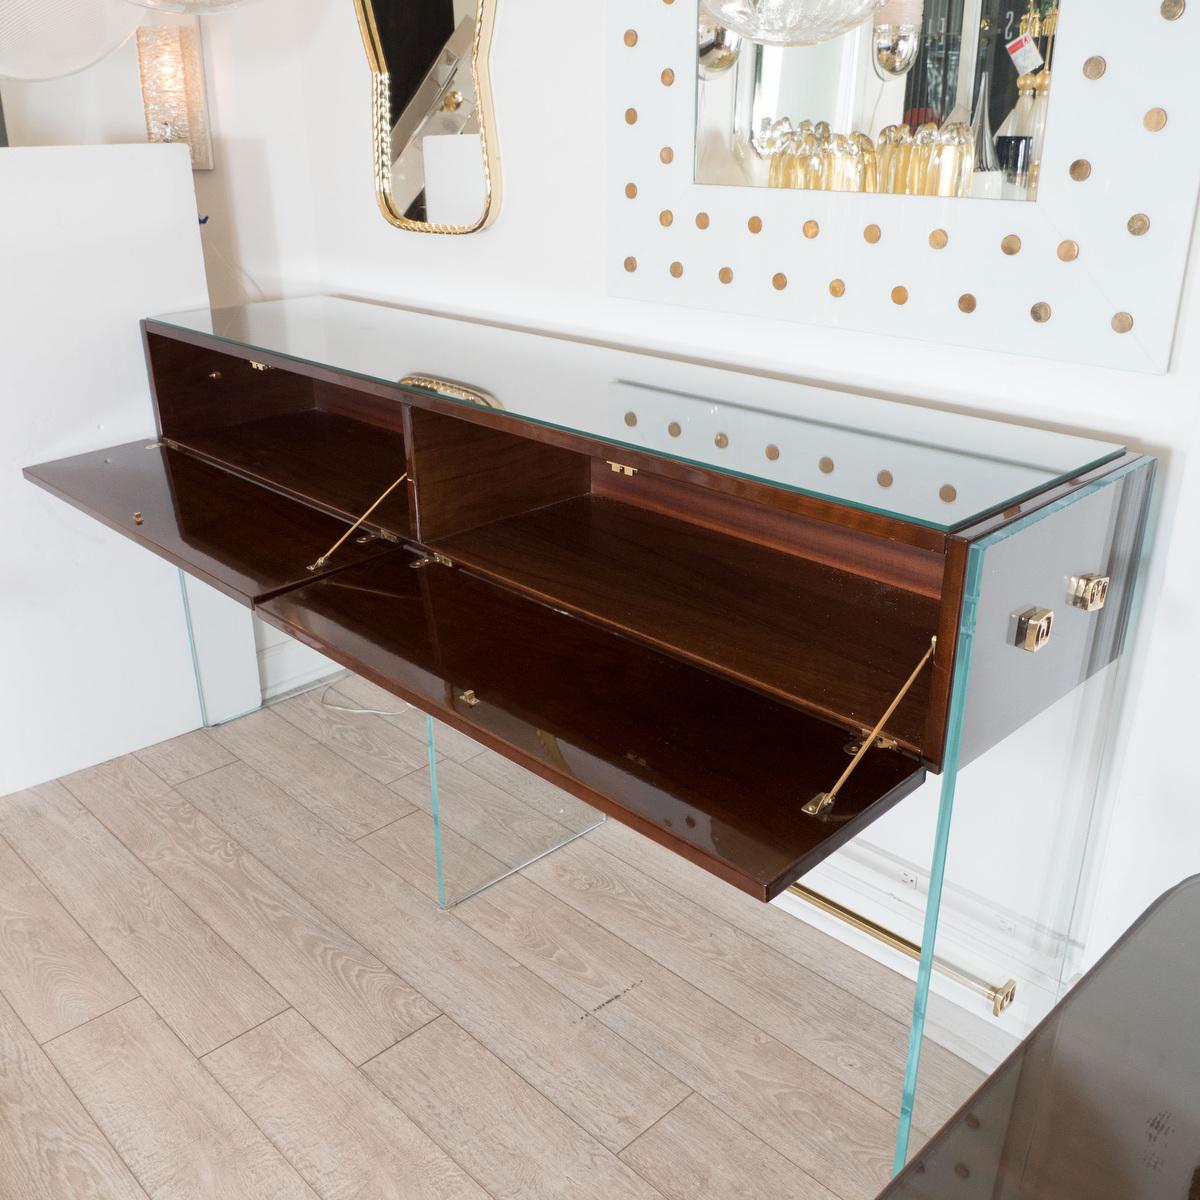 Rectangular walnut console with two drop down drawers and glass surround by Frigerio.